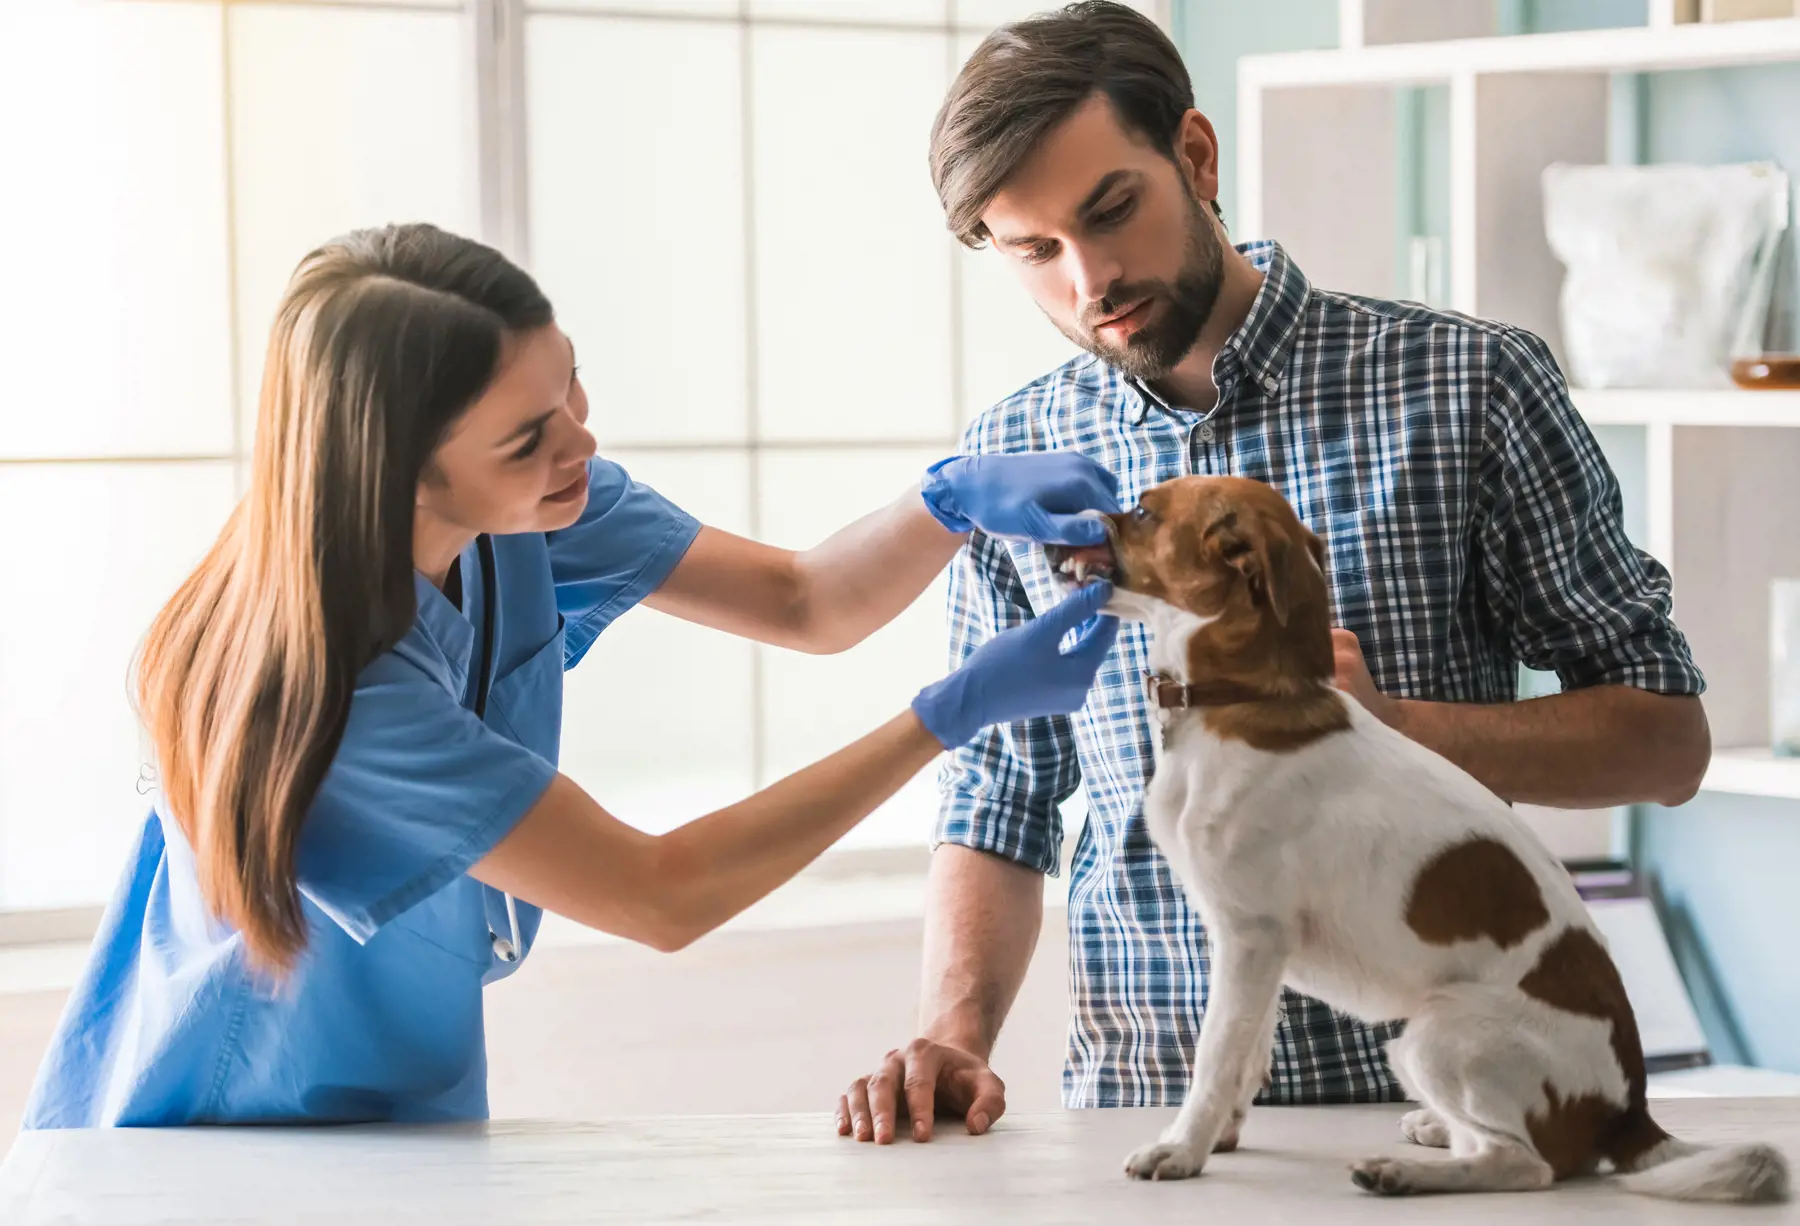 Fewer pets are having vaccinations